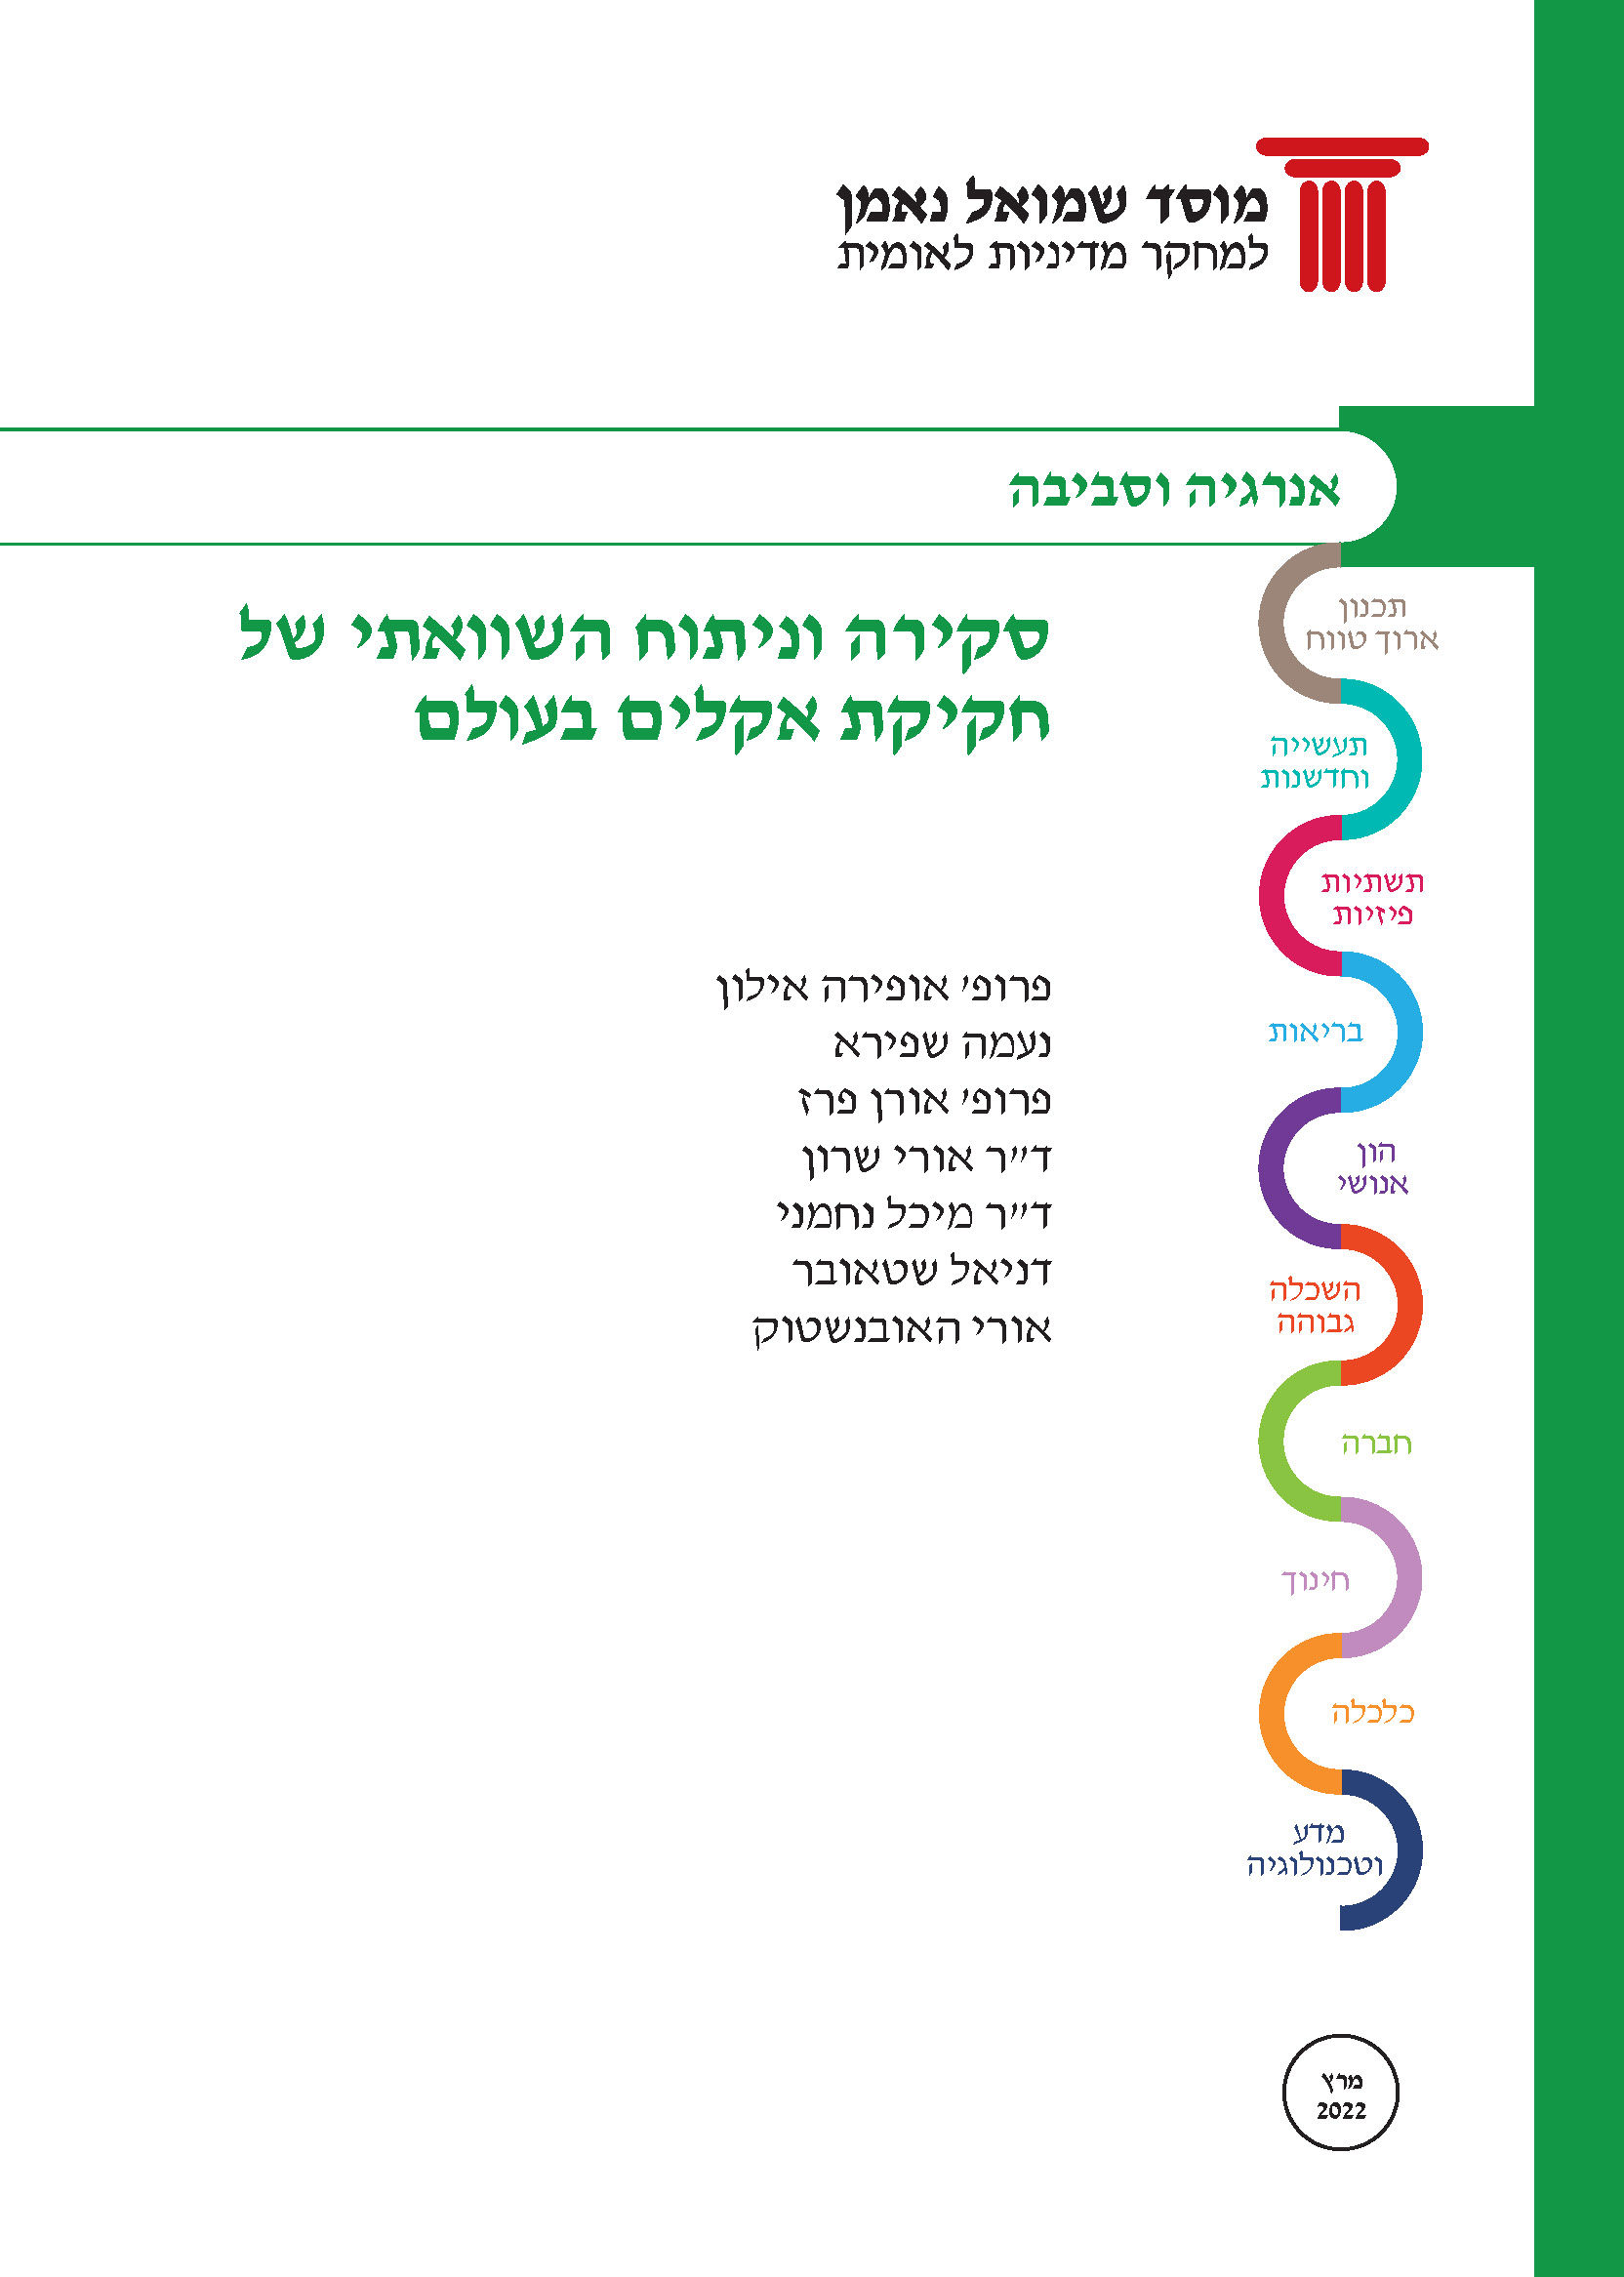 Fundamental Elements in Designing Climate Law, and Recommendations for Implementation in Israeli Legislation